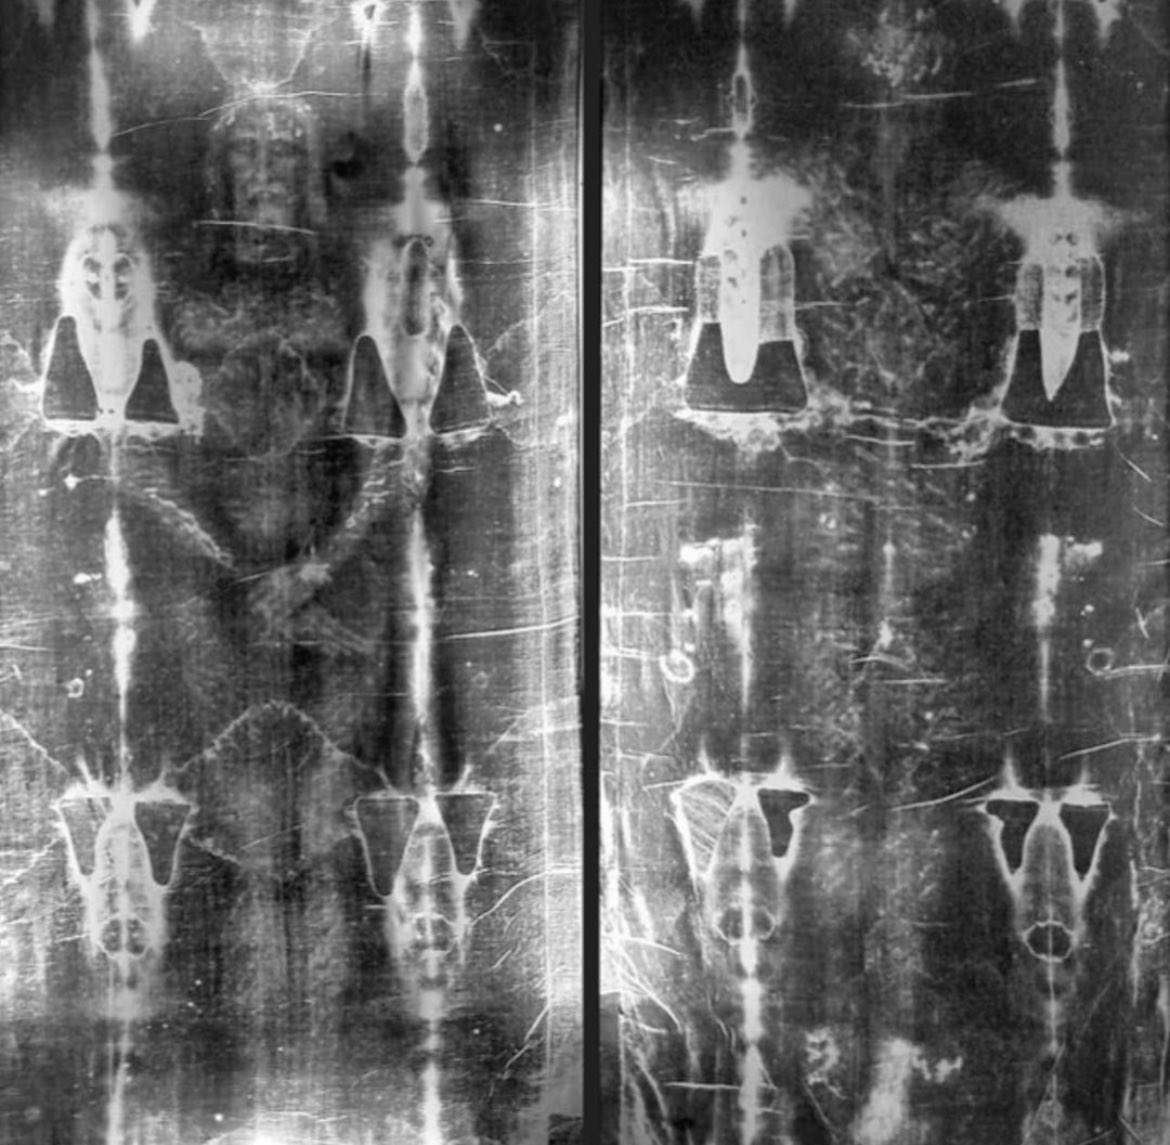 The Shroud of Turin is a linen cloth that bears the image of a man who appears to have been physically crucified. It is believed by some to be the burial shroud of Jesus of Nazareth.